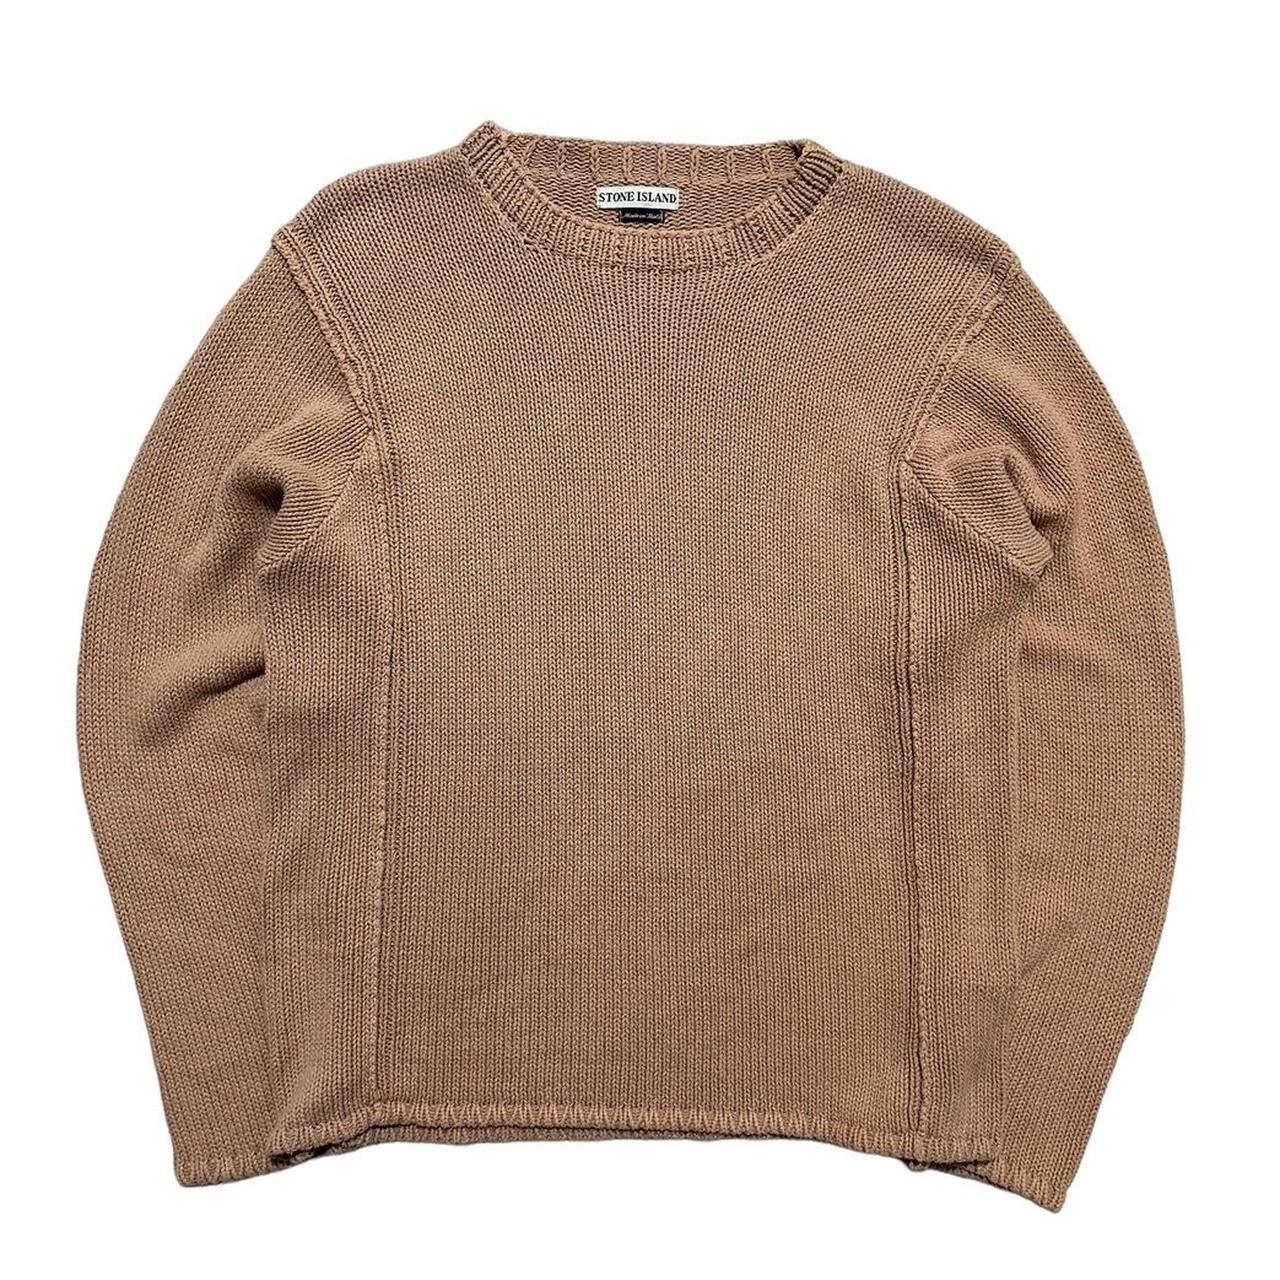 Stone Island Peach Heavy Knit Pullover Jumper - Known Source